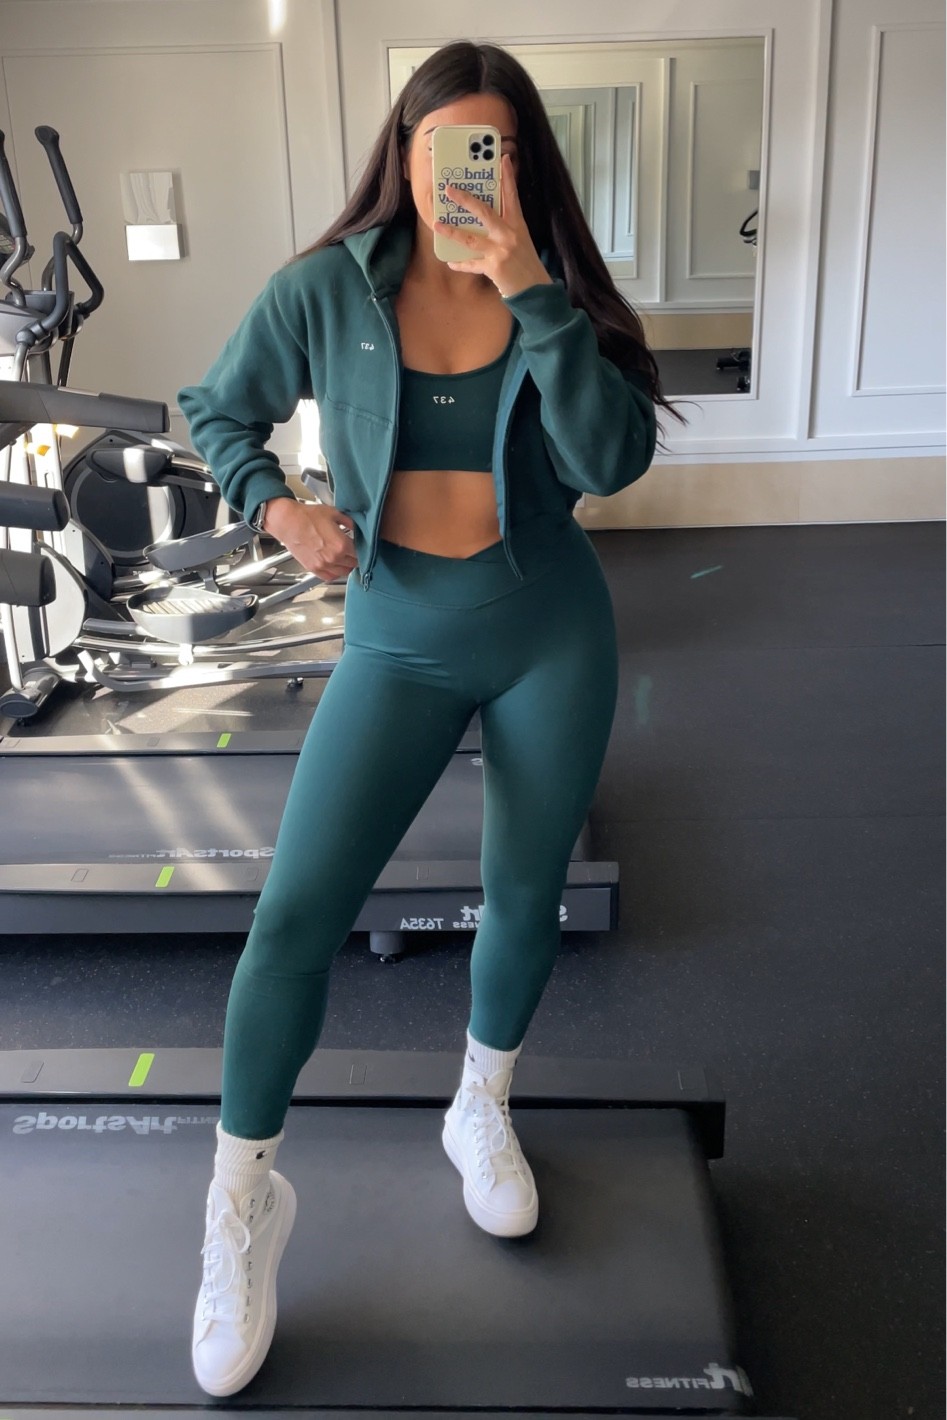 Girls in Leggings 🍑 on X: Green #leggings are rare these days - even  though this #fitness queen demonstrates how good they can look, at least if  you have a perfect shape